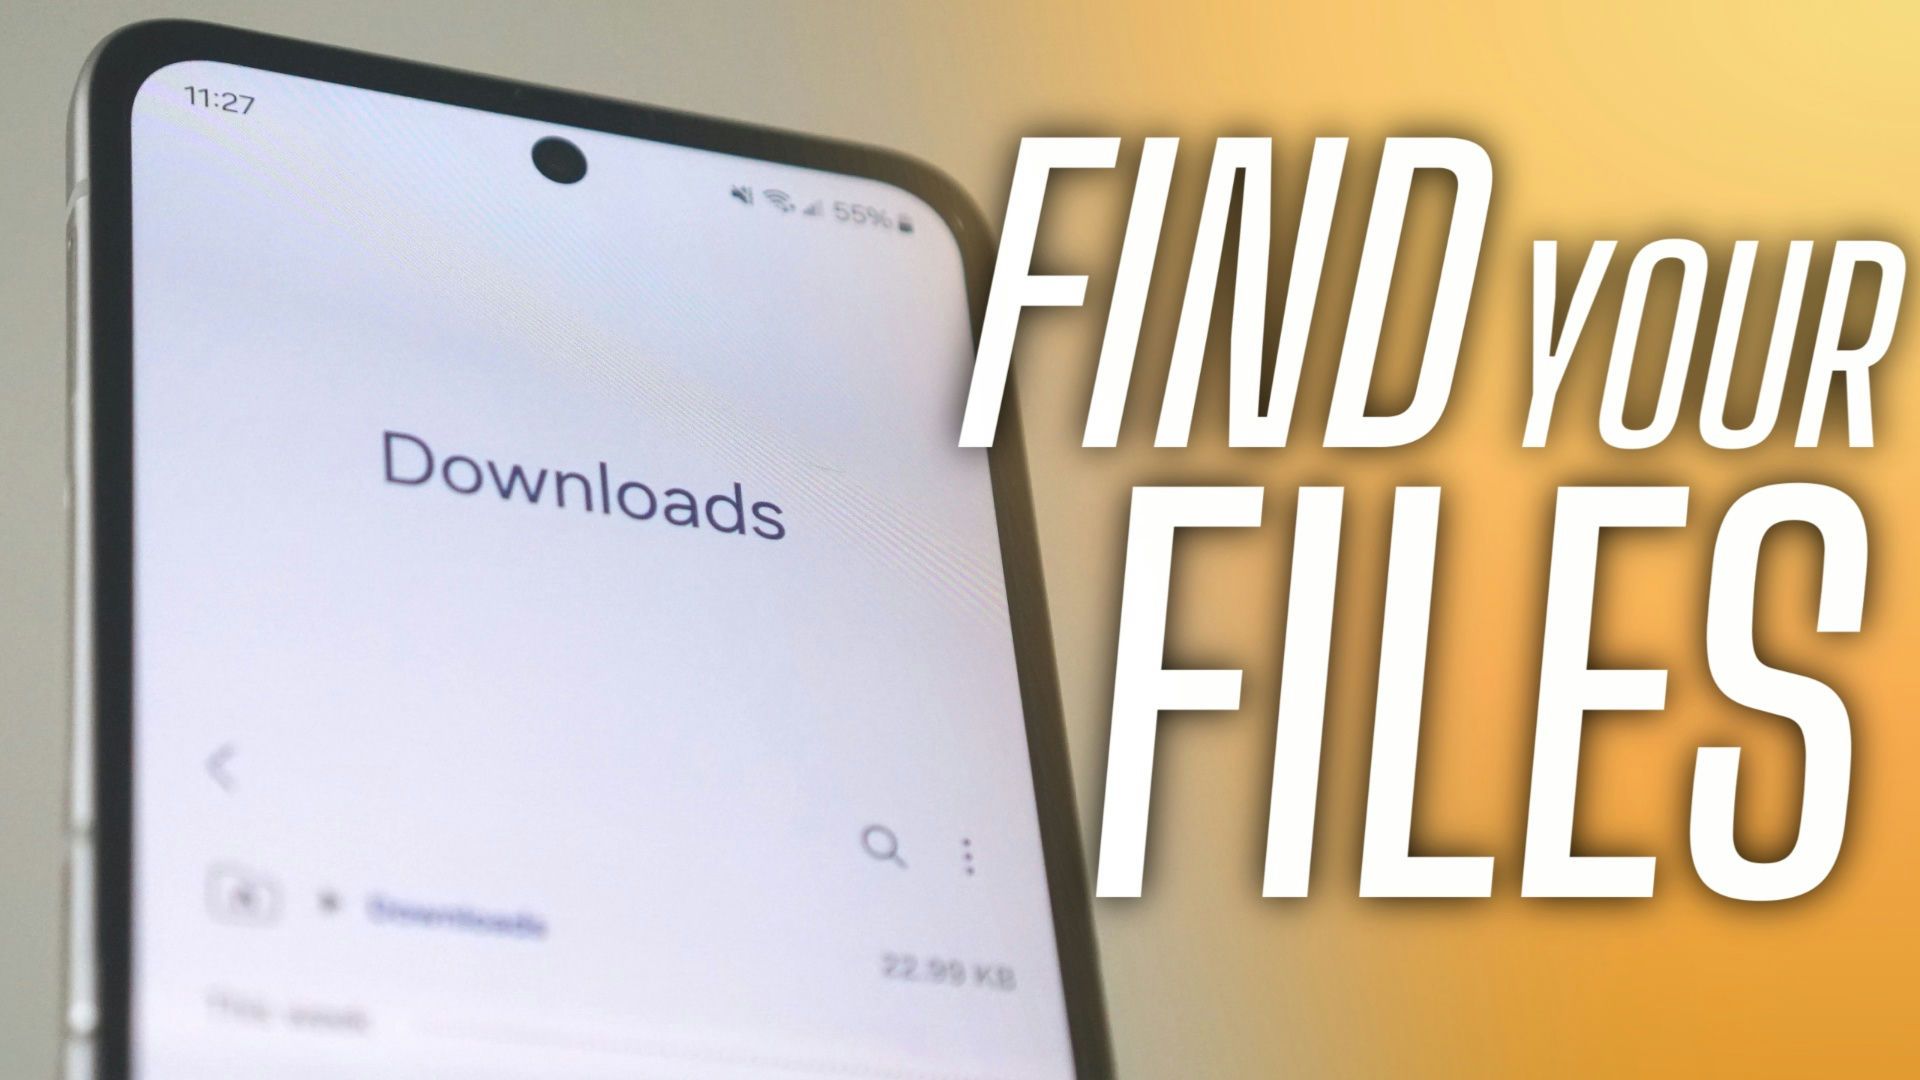 Where to find downloads on your Samsung Galaxy phone